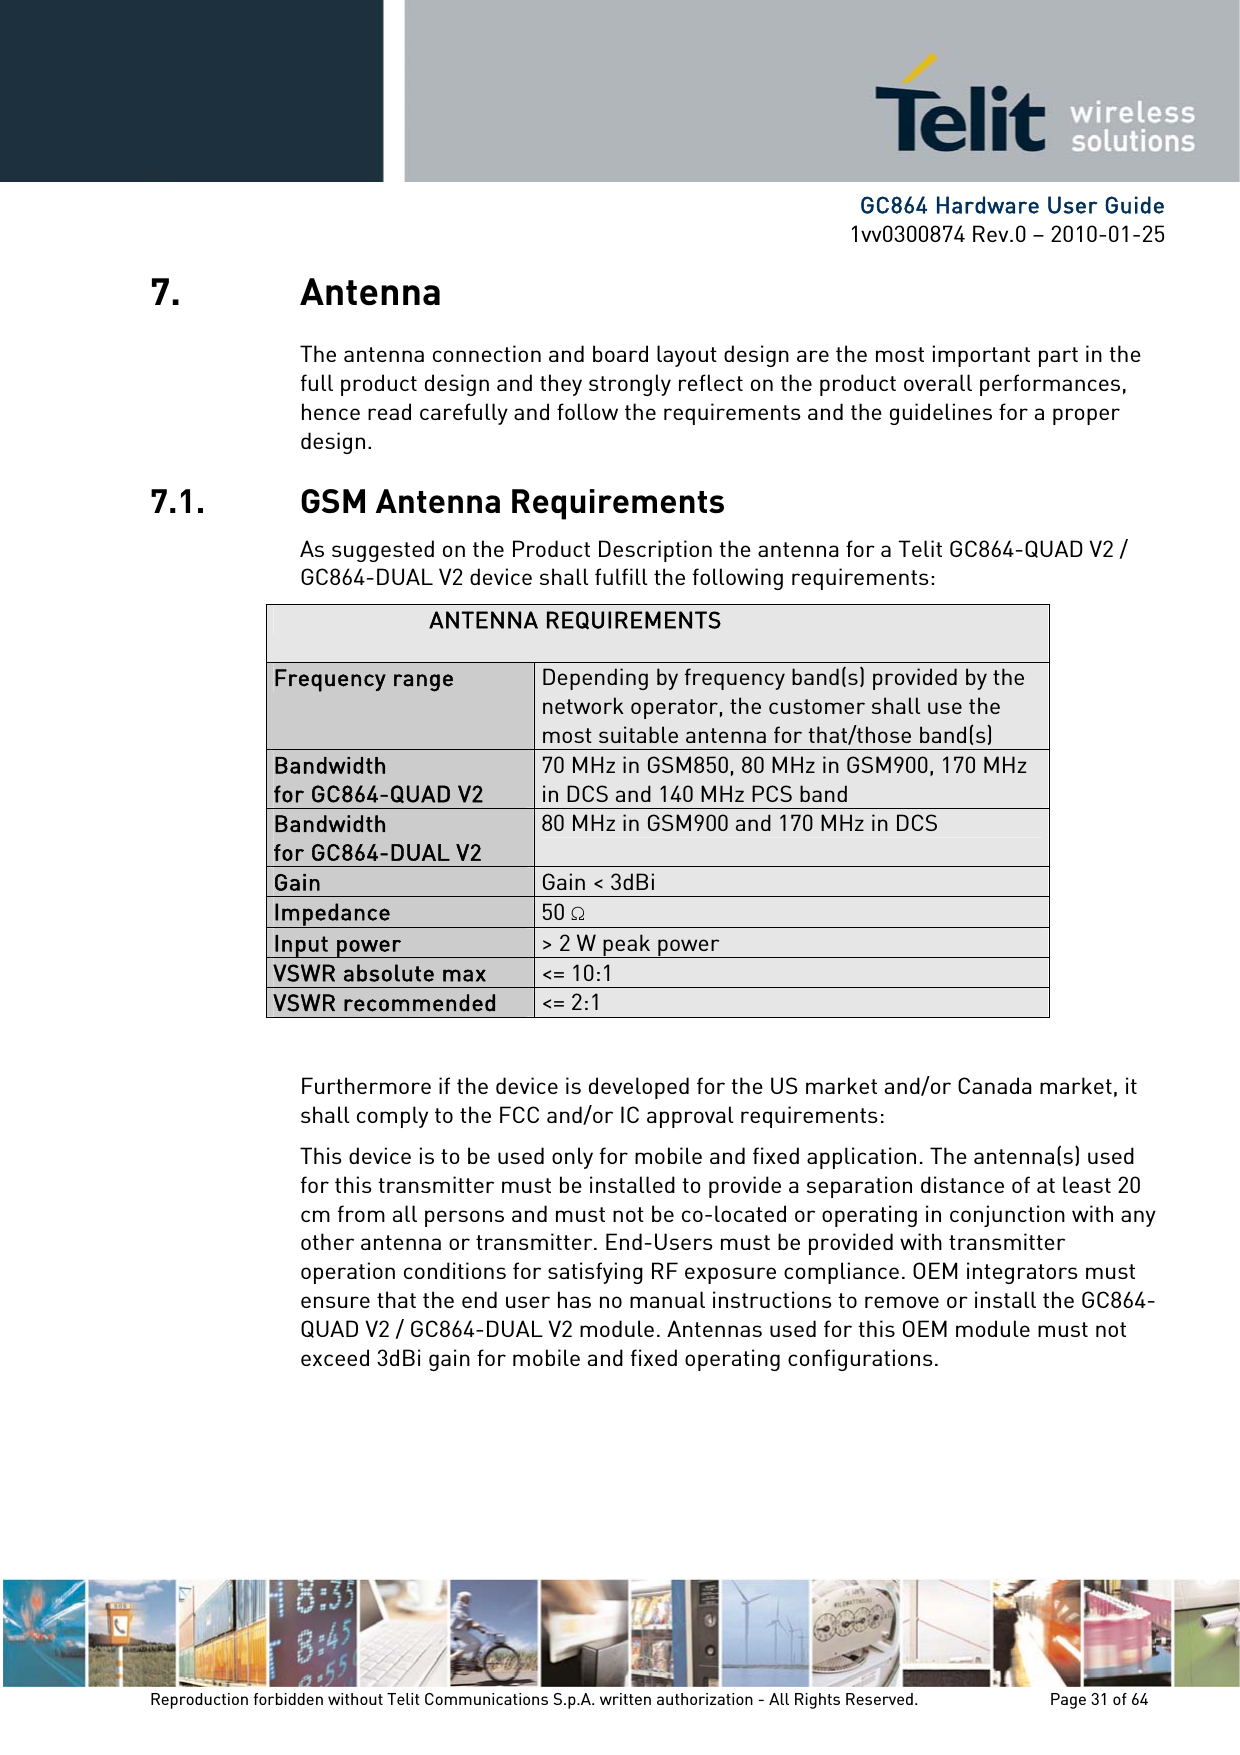      GC864 Hardware User Guide 1vv0300874 Rev.0 – 2010-01-25 Reproduction forbidden without Telit Communications S.p.A. written authorization - All Rights Reserved.    Page 31 of 64  7. Antenna The antenna connection and board layout design are the most important part in the full product design and they strongly reflect on the product overall performances, hence read carefully and follow the requirements and the guidelines for a proper design. 7.1. GSM Antenna Requirements As suggested on the Product Description the antenna for a Telit GC864-QUAD V2 / GC864-DUAL V2 device shall fulfill the following requirements: ANTENNA REQUIREMENTS Frequency range  Depending by frequency band(s) provided by the network operator, the customer shall use the most suitable antenna for that/those band(s) Bandwidth  for GC864-QUAD V2 70 MHz in GSM850, 80 MHz in GSM900, 170 MHz in DCS and 140 MHz PCS band Bandwidth  for GC864-DUAL V2 80 MHz in GSM900 and 170 MHz in DCS  Gain  Gain &lt; 3dBi Impedance  50  Input power  &gt; 2 W peak power VSWR absolute max  &lt;= 10:1 VSWR recommended  &lt;= 2:1  Furthermore if the device is developed for the US market and/or Canada market, it shall comply to the FCC and/or IC approval requirements: This device is to be used only for mobile and fixed application. The antenna(s) used for this transmitter must be installed to provide a separation distance of at least 20 cm from all persons and must not be co-located or operating in conjunction with any other antenna or transmitter. End-Users must be provided with transmitter operation conditions for satisfying RF exposure compliance. OEM integrators must ensure that the end user has no manual instructions to remove or install the GC864-QUAD V2 / GC864-DUAL V2 module. Antennas used for this OEM module must not exceed 3dBi gain for mobile and fixed operating configurations. 